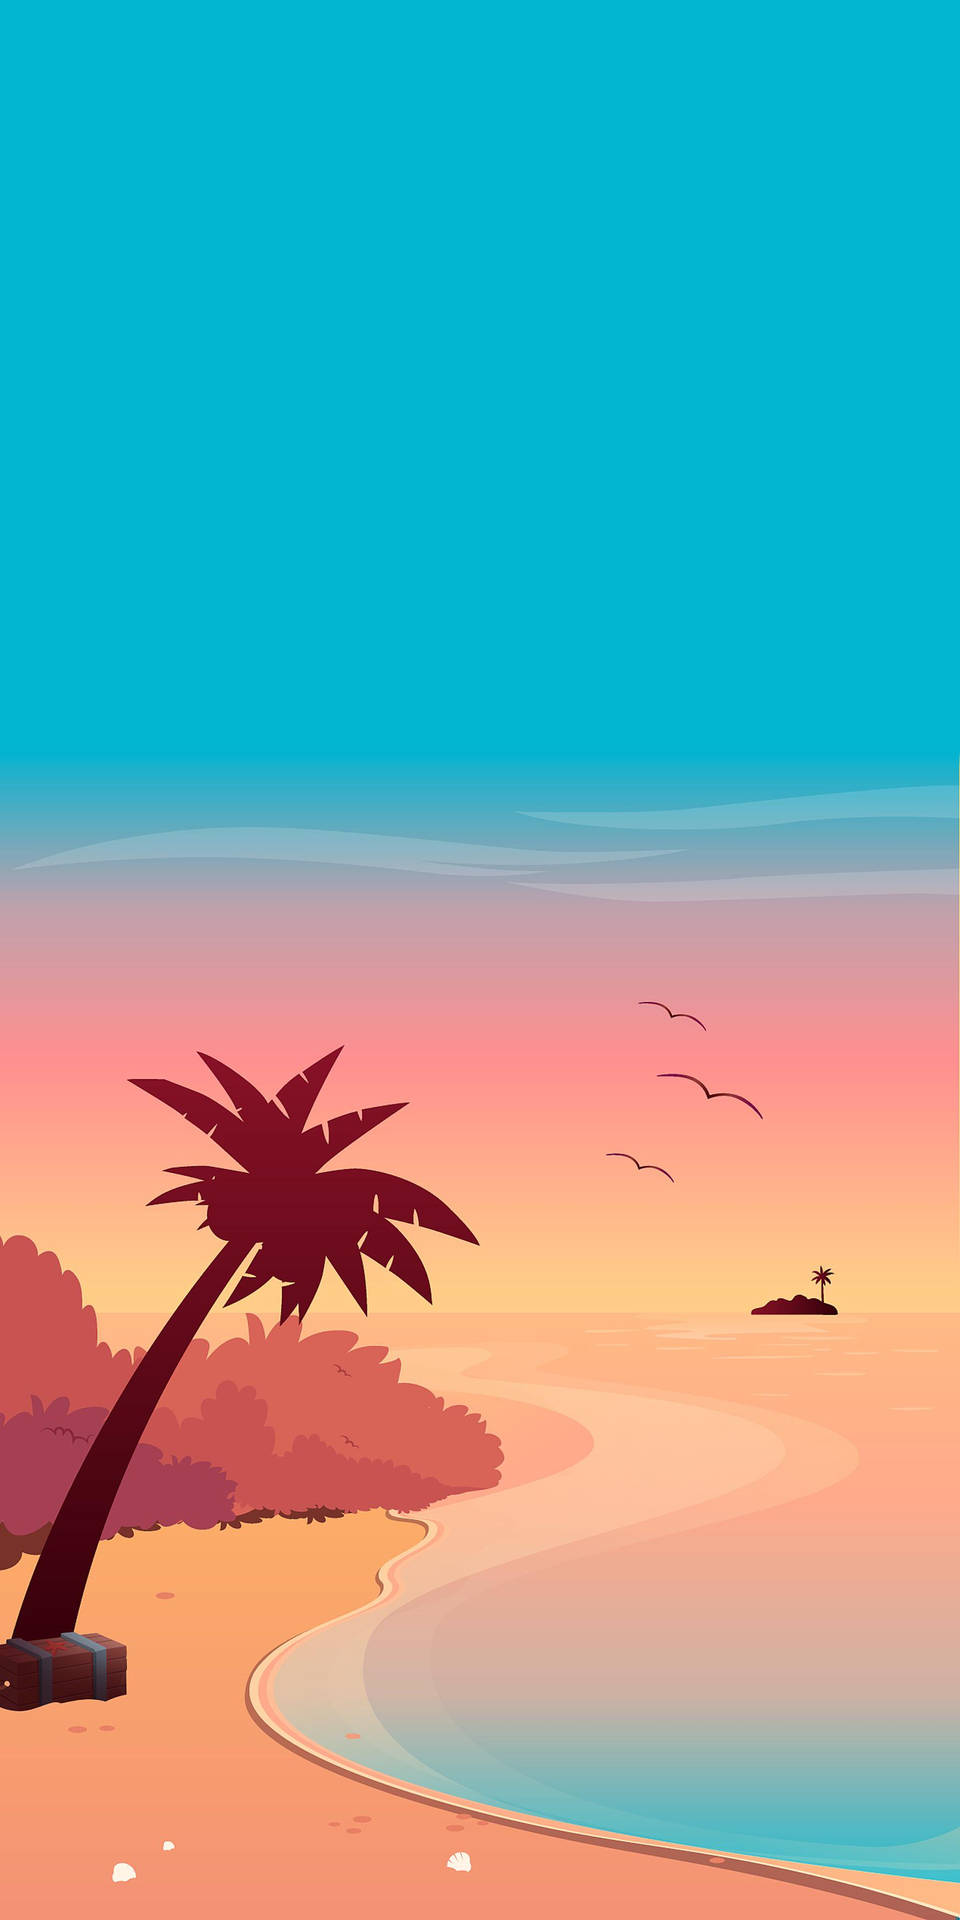 Afternoon Beach Vibes Wallpaper